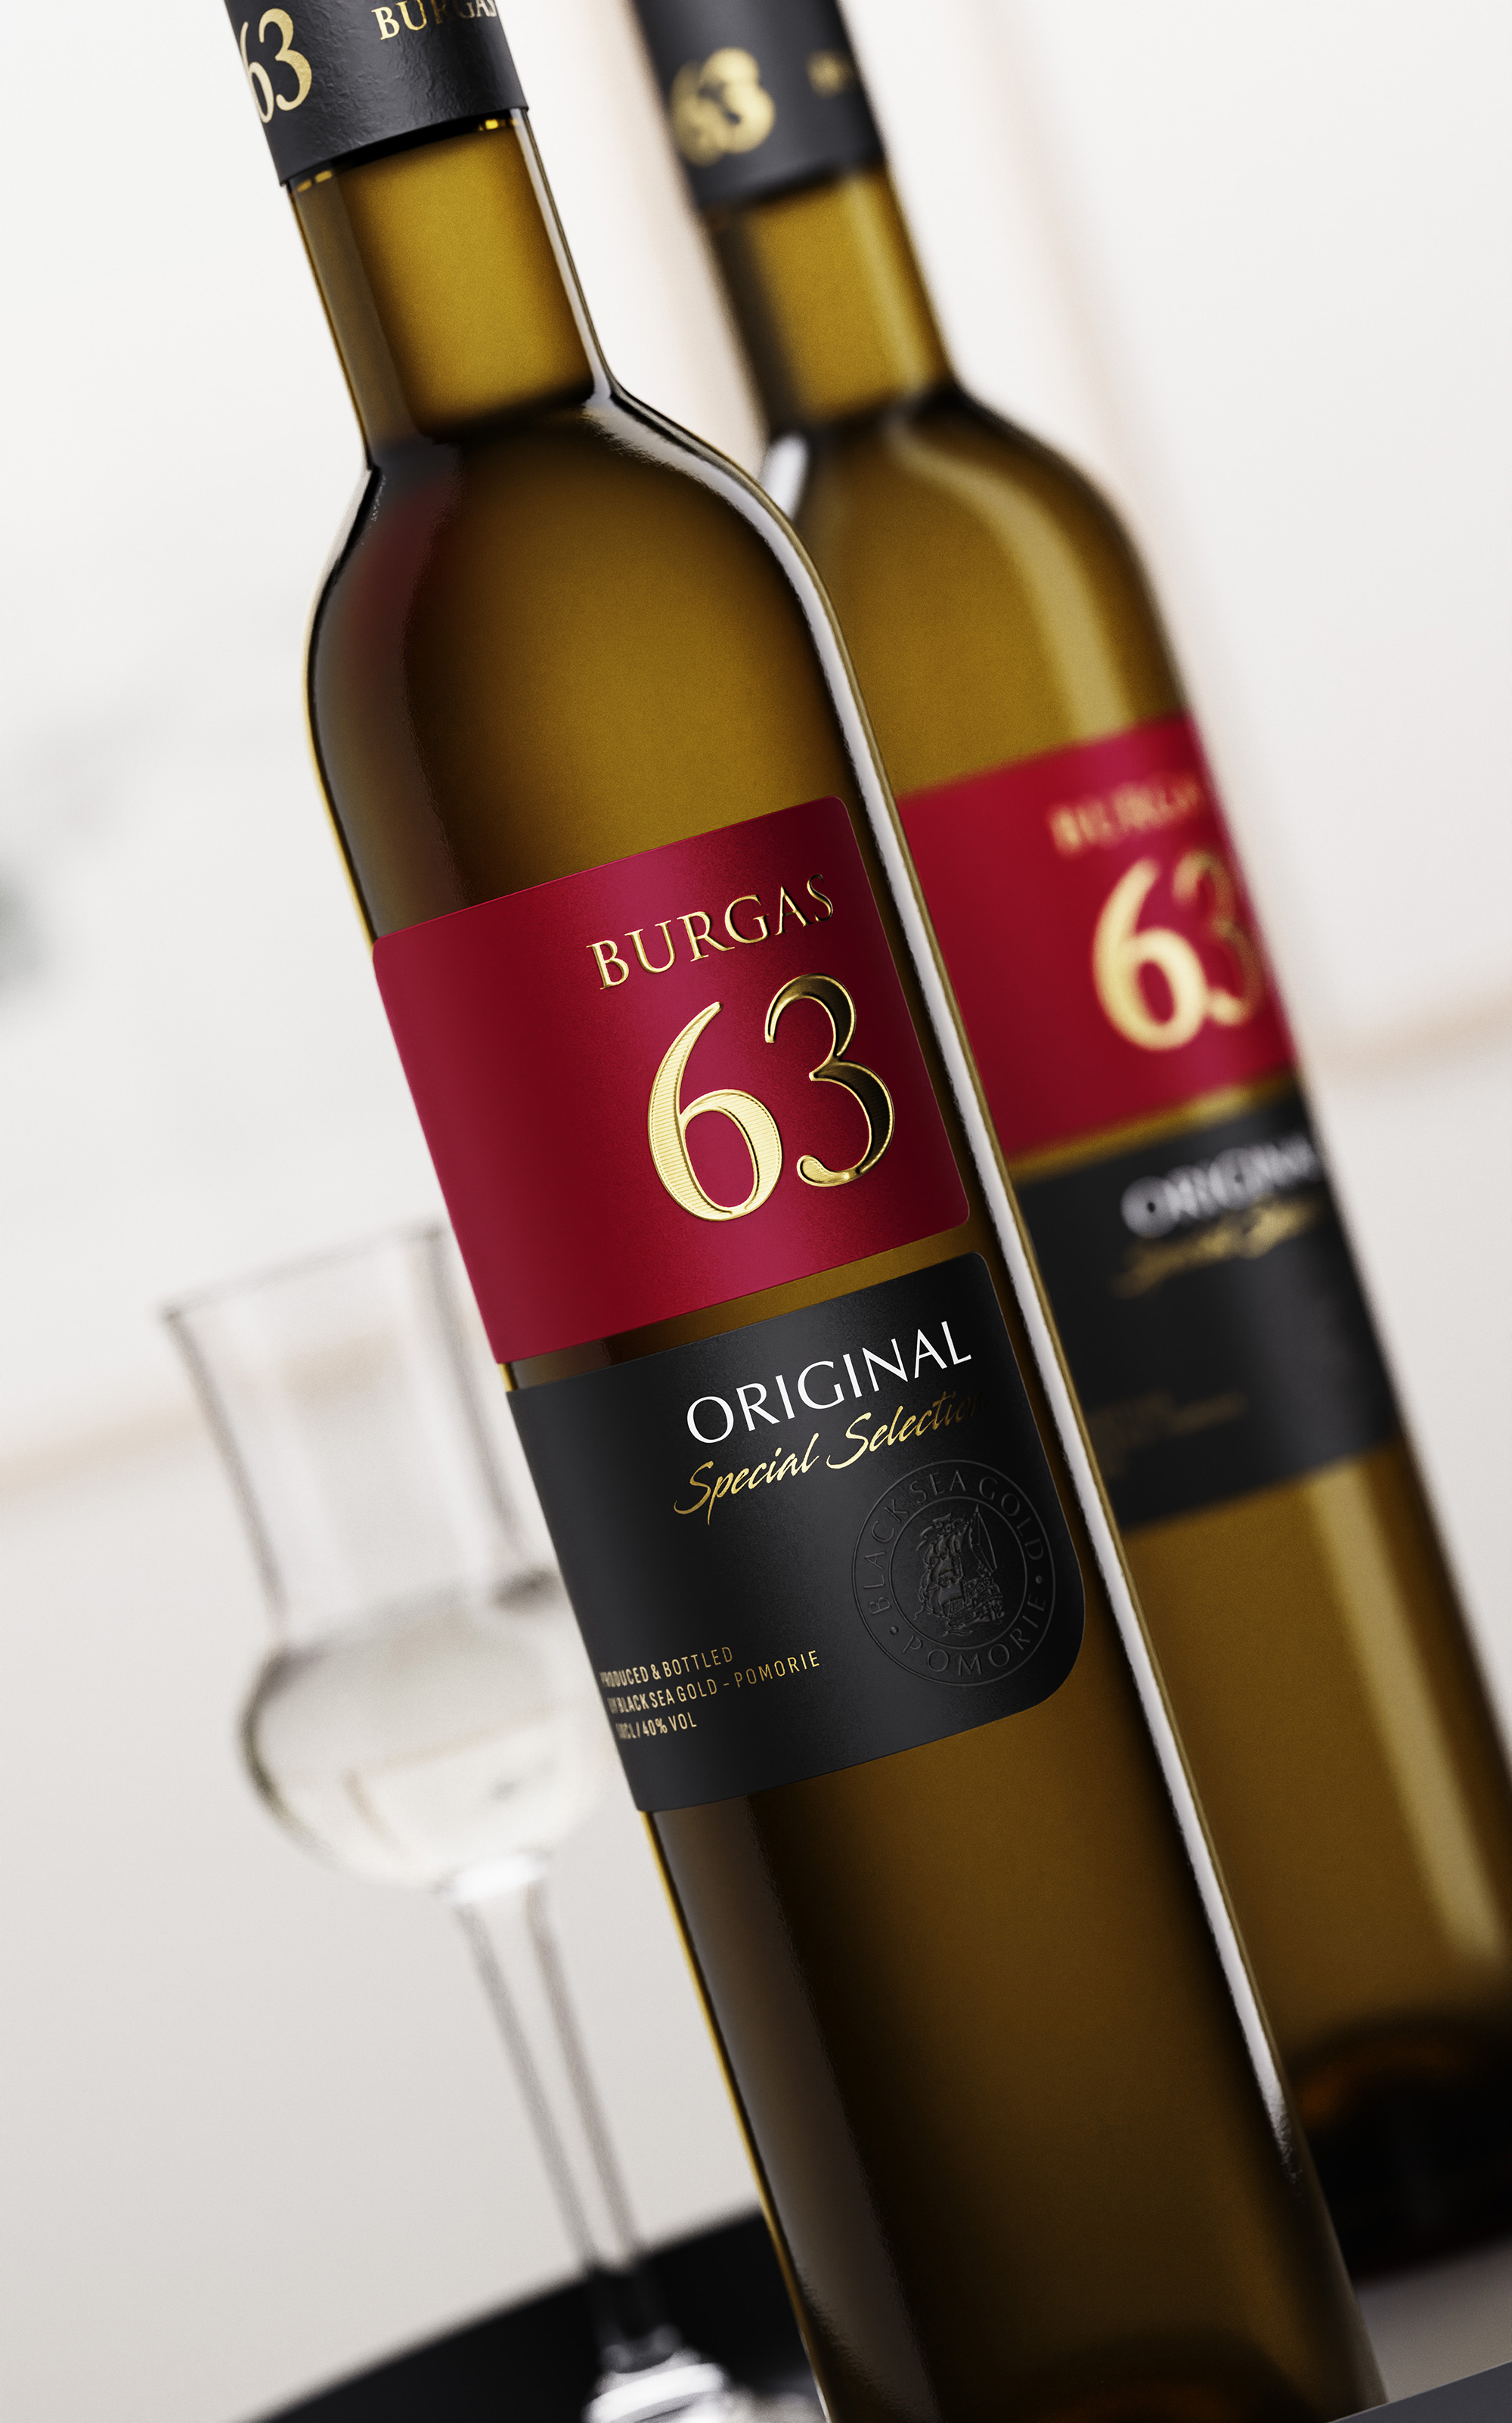 Burgas 63 Rakia Redesign: A Sophisticated Update to an Iconic Spirits Brand